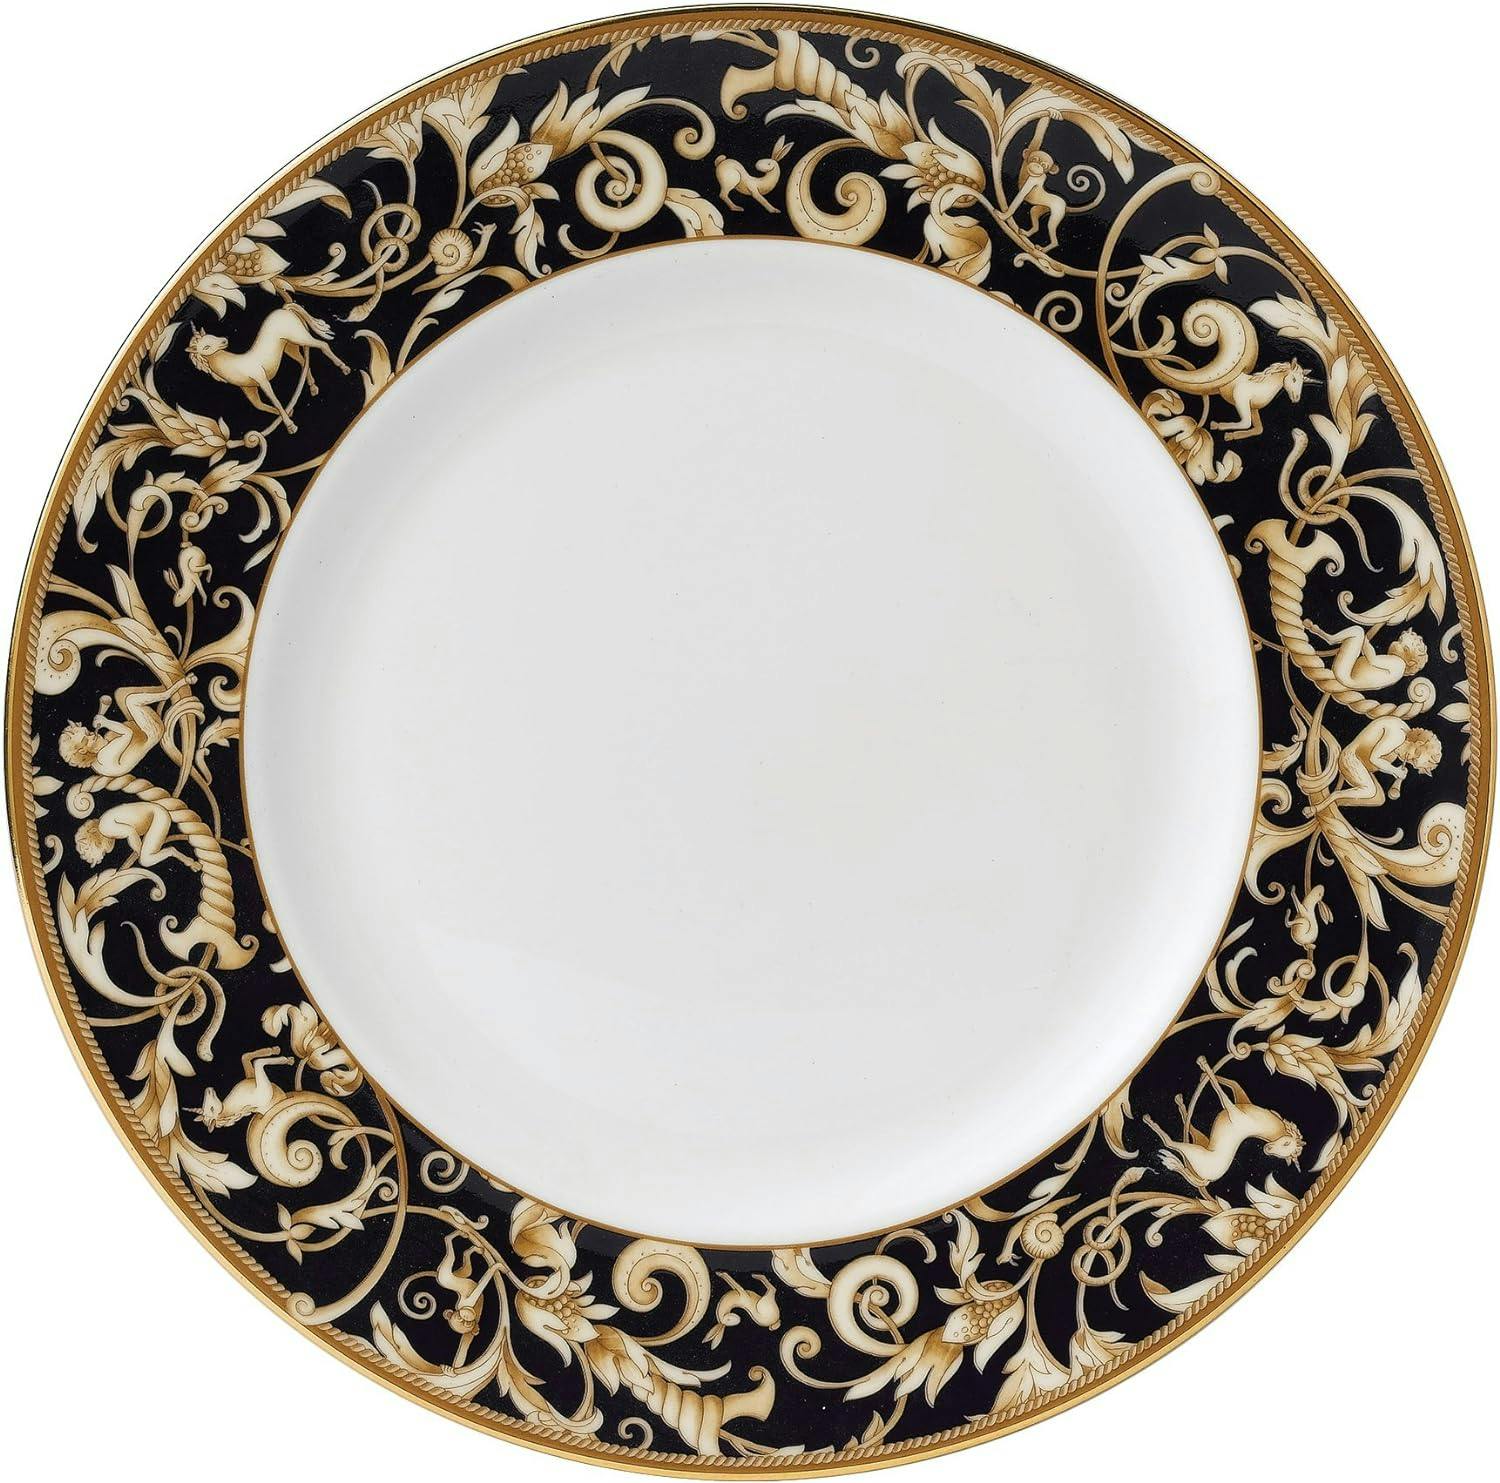 Mythical Cornucopia 10.75" Porcelain Dinner Plate with Gold Trim